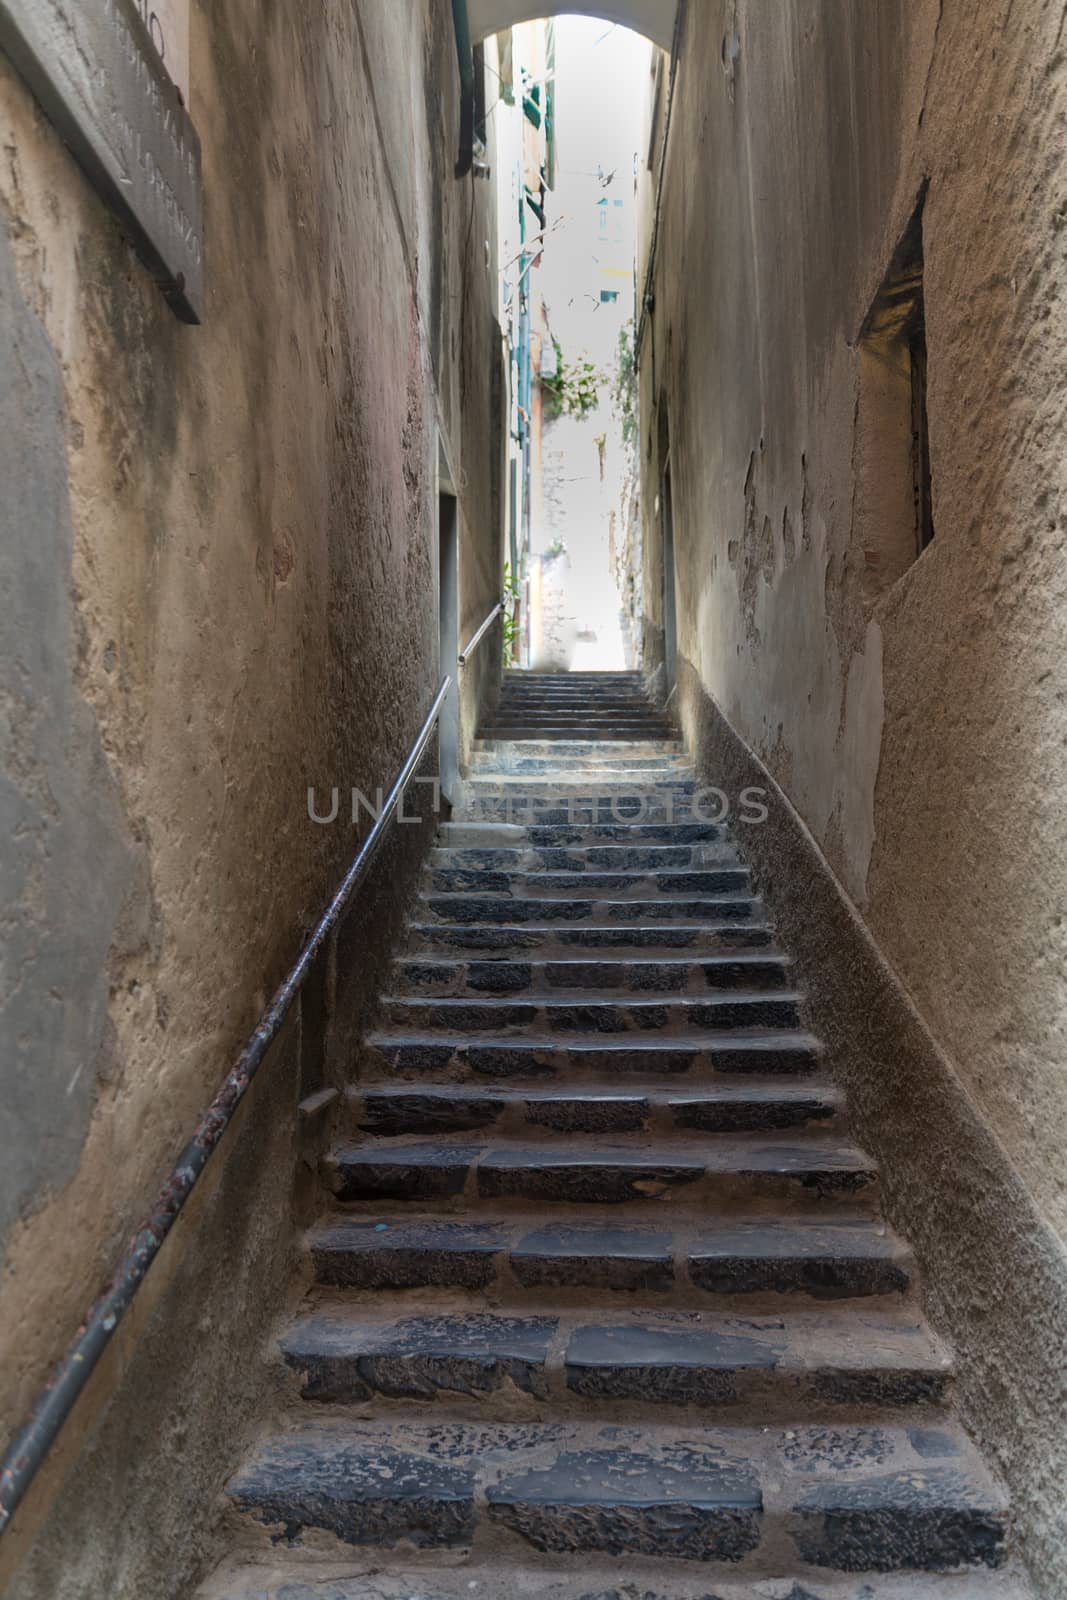 Alley and steps in Portovenere in the Ligurian region of Italy near the Cinque Terre